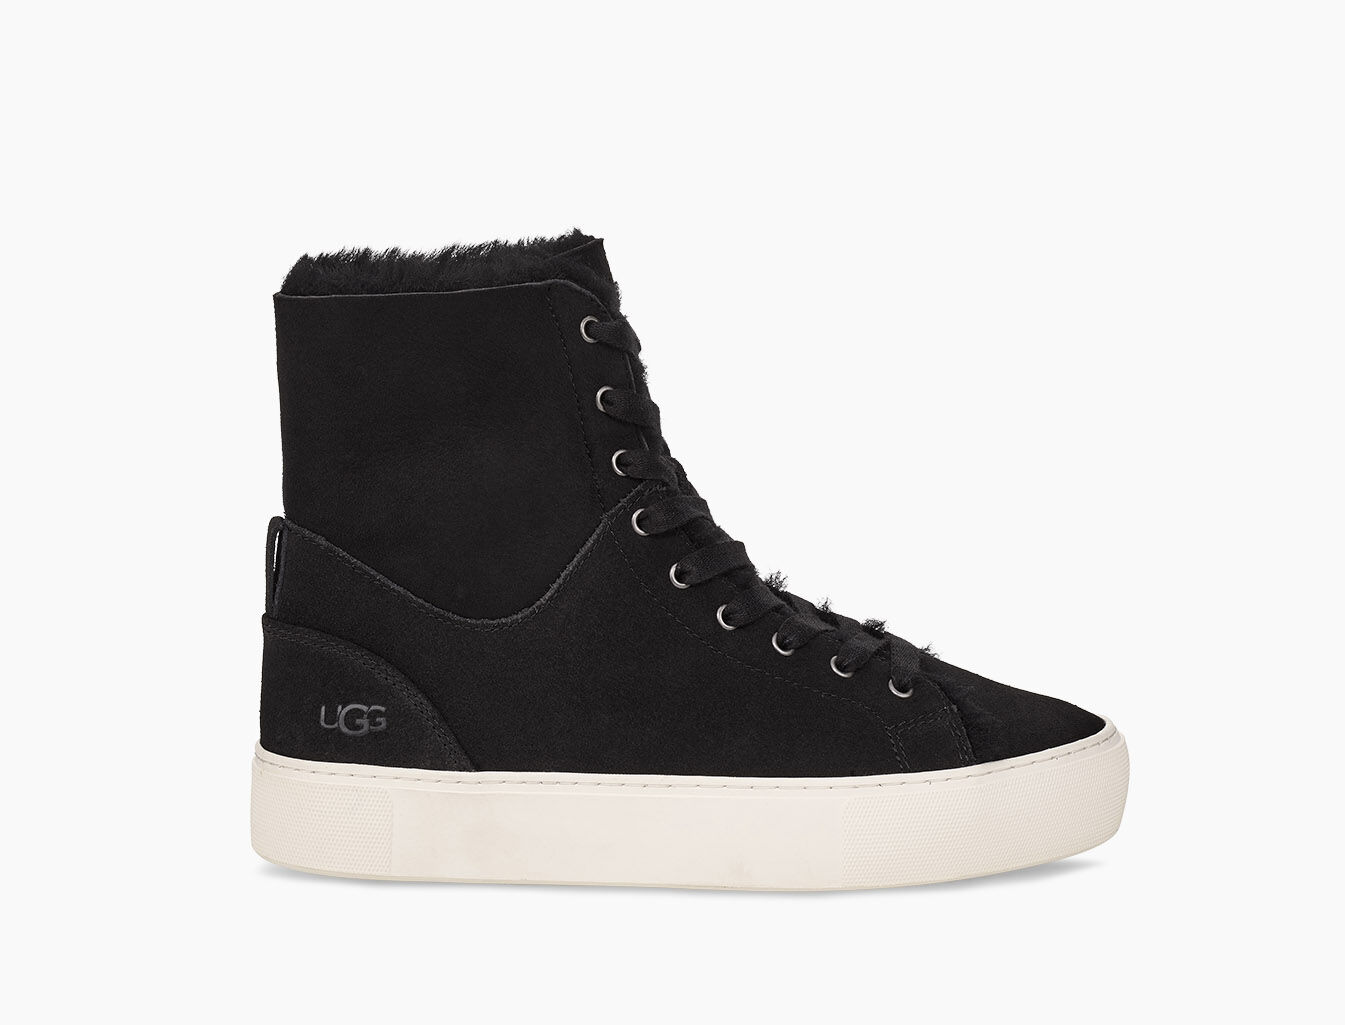 ugg suede trainers